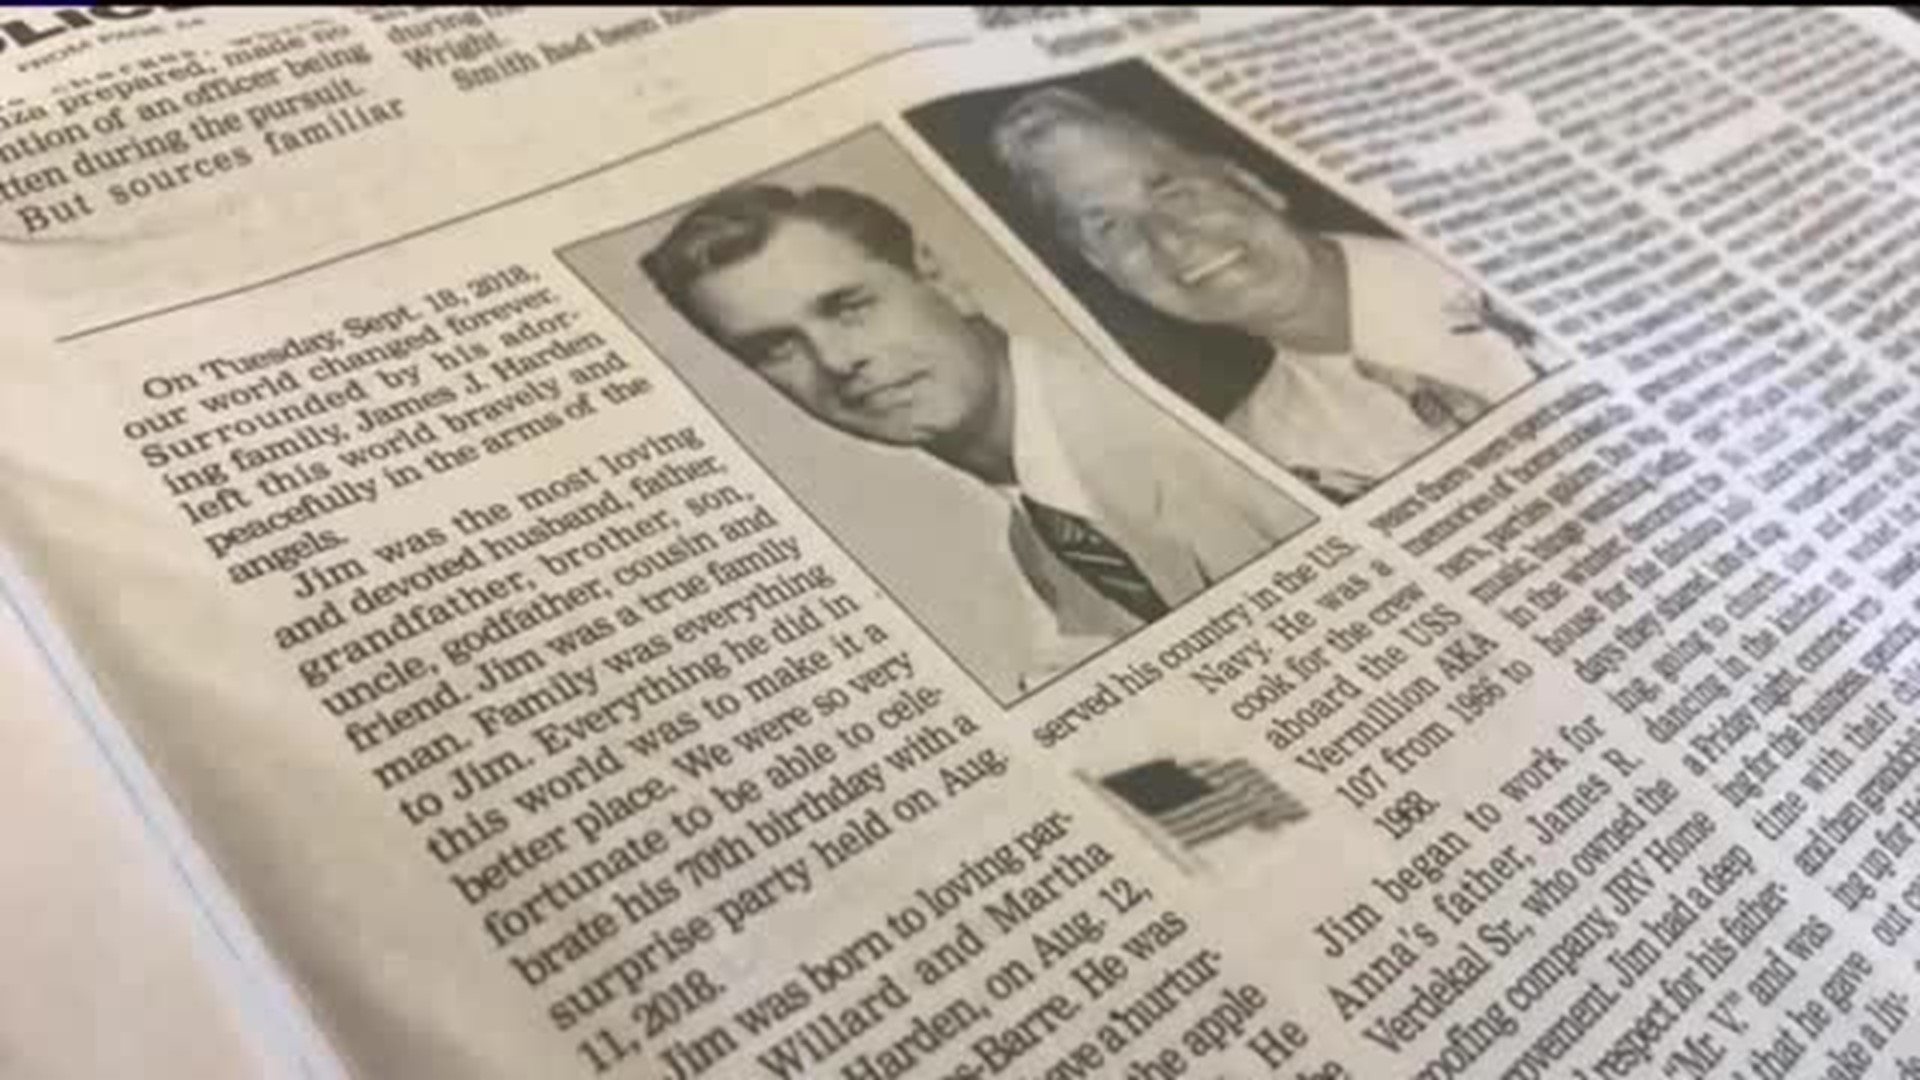 Family Pens Unique Obituary in Honor of Luzerne County Man